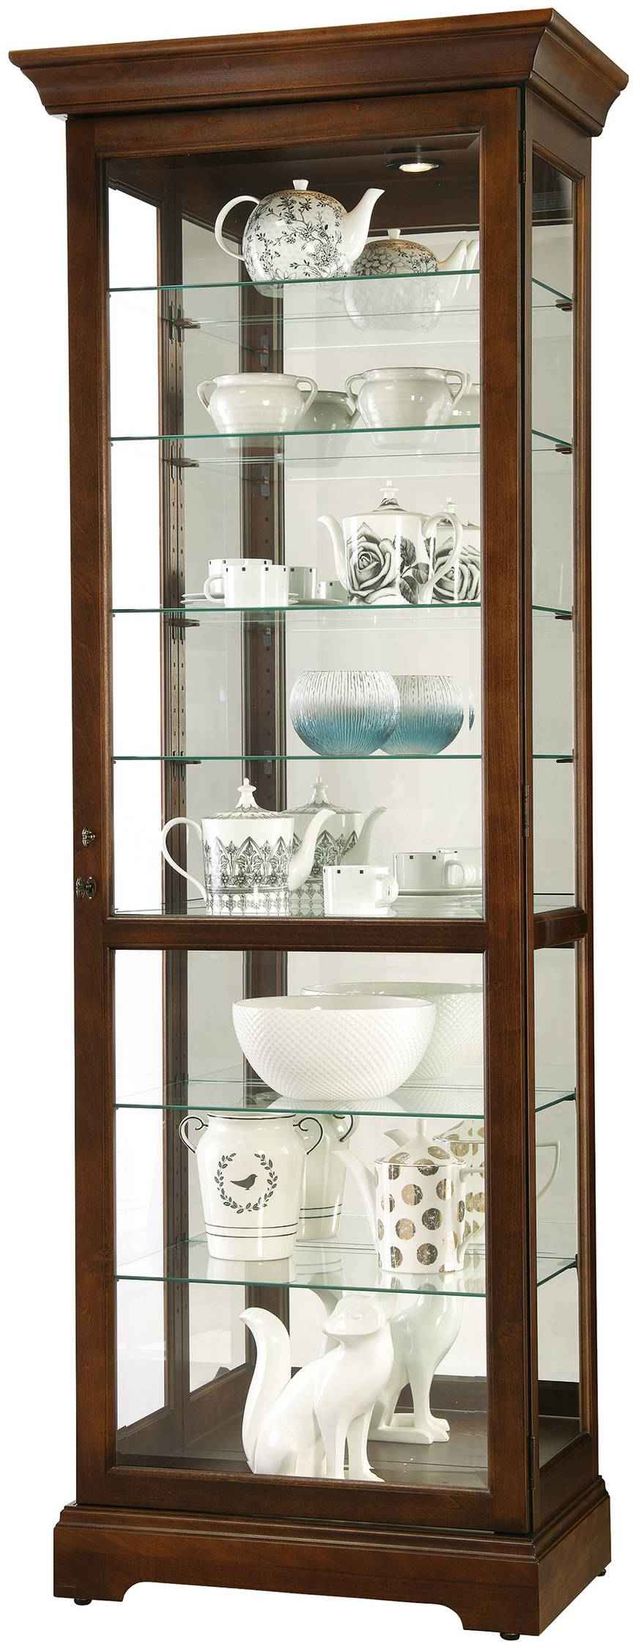 Howard Miller® Chesterbrook I Cherry Bordeaux Curio Cabinet